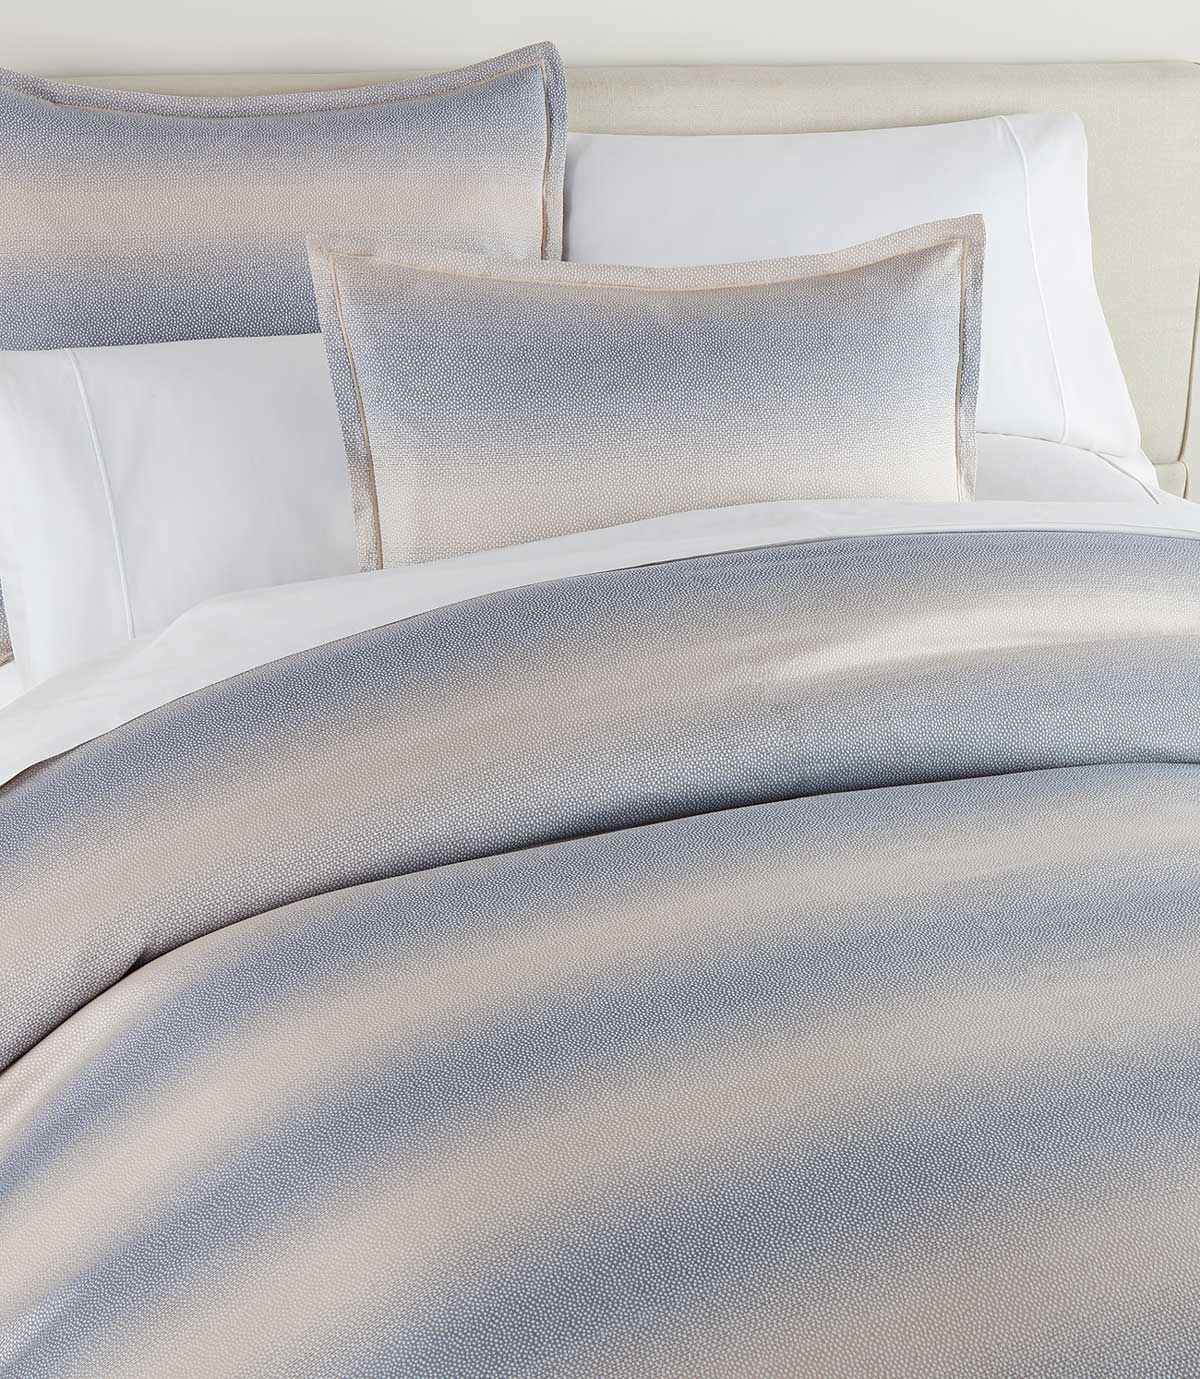 Elena Jacquard Shams on bed with matching duvet cover, Blue